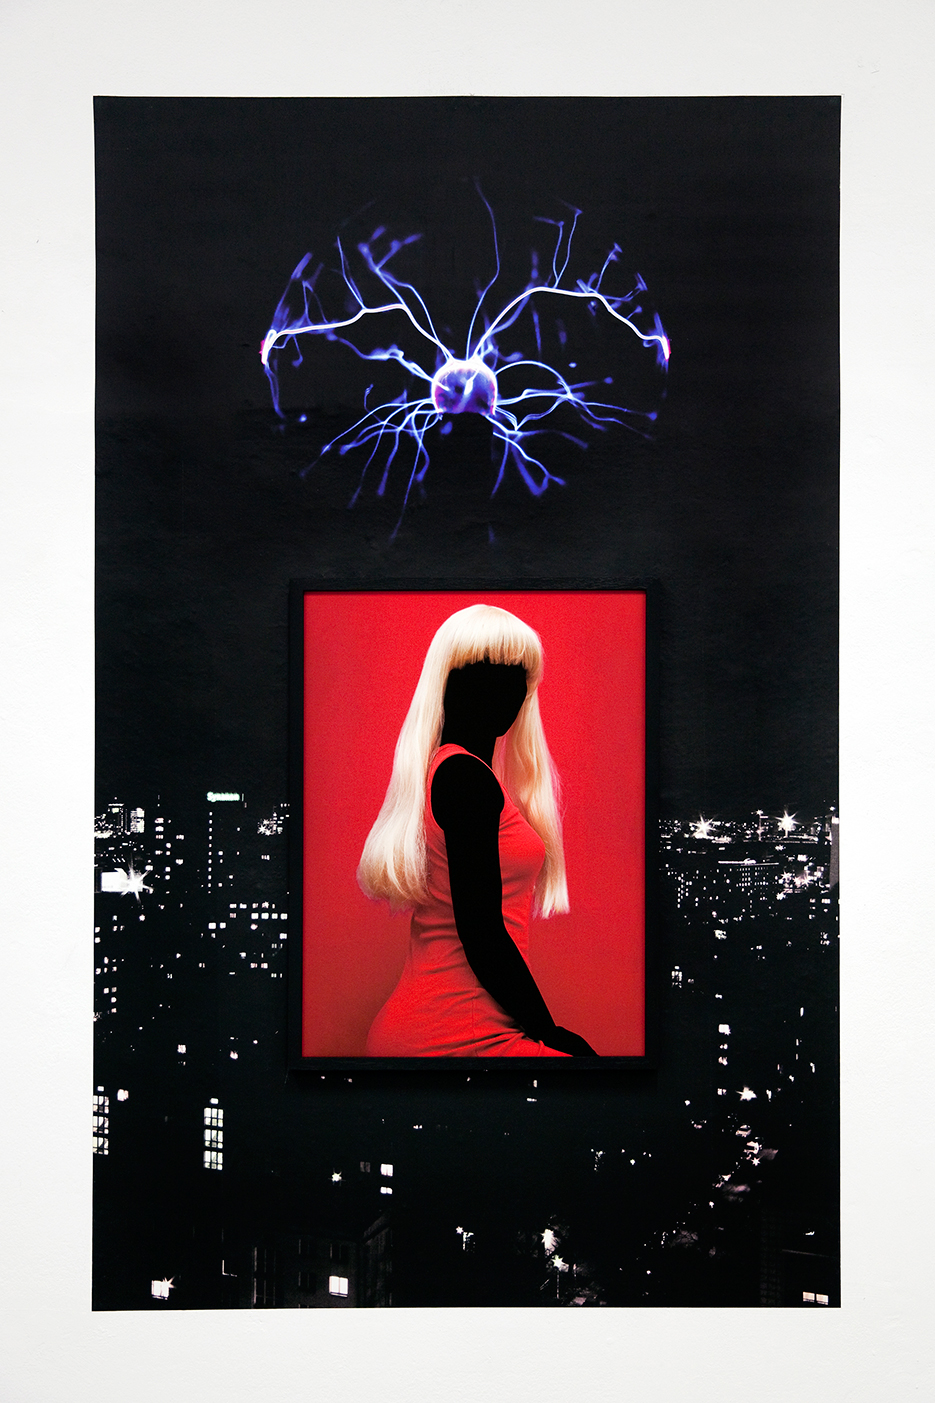 installationview - deatial befangen: a woman in a red dress with a blond wig and erased skin hangs framed on top  large pasted landsape of berlins cittyskyline at night with a plasmaball floating in the air